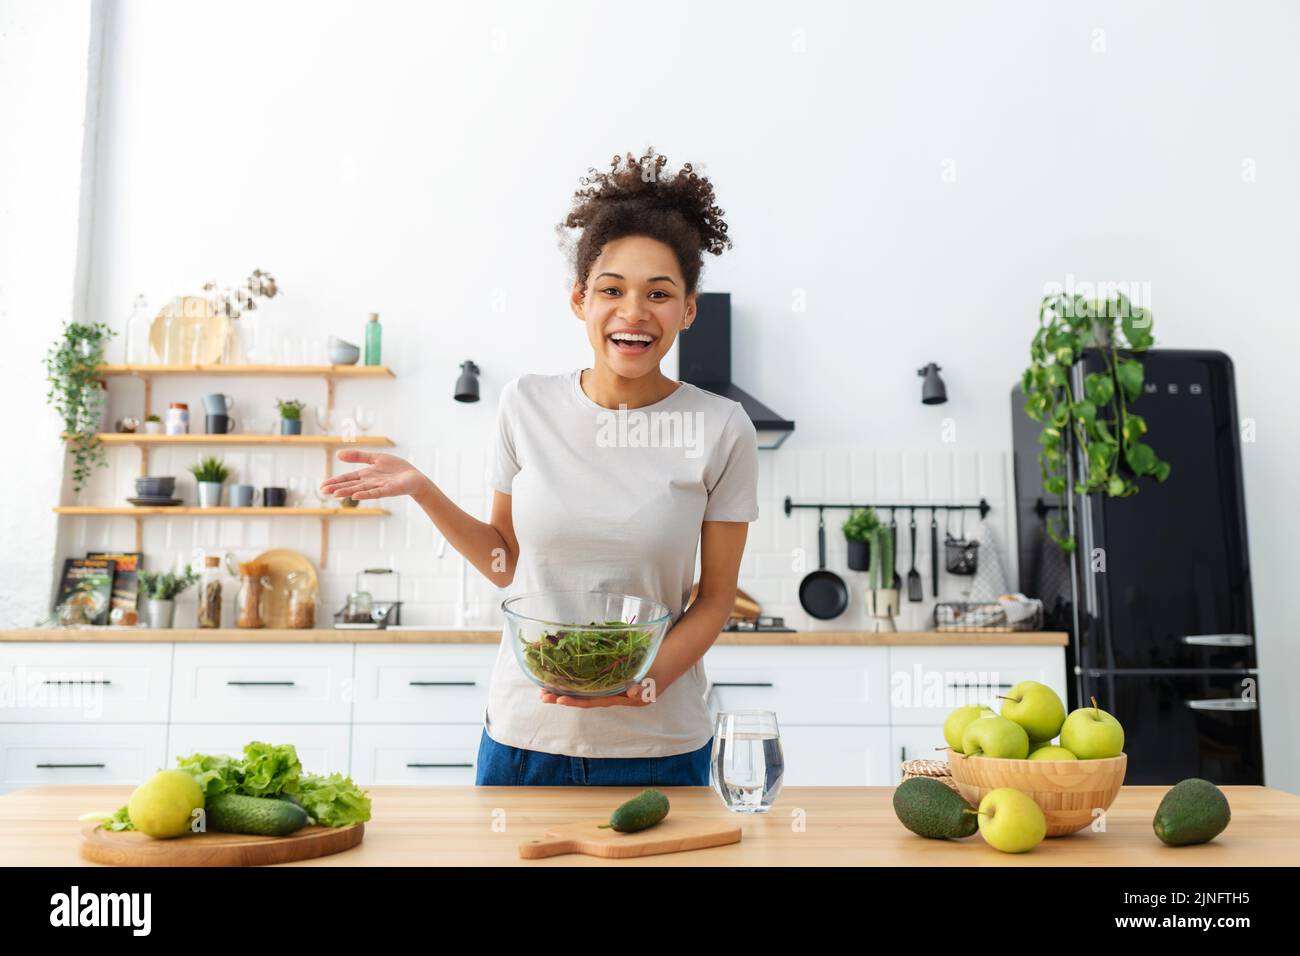 young woman using webcam to record video of cooking healthy food Healthy lifestyle concept online webinar Stock Photo